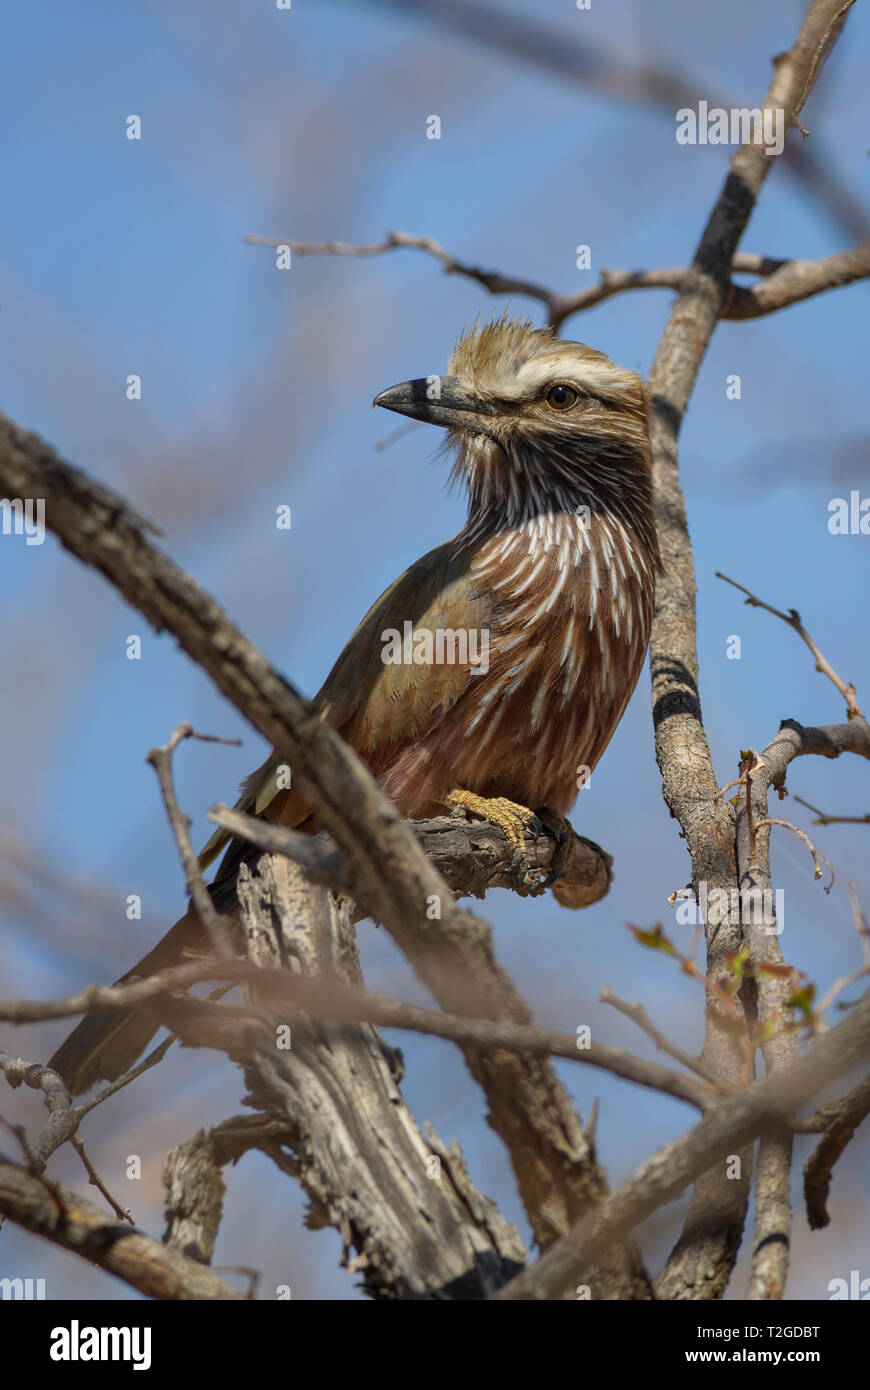 Rufous-crowned Roller - Coracias naevius, beautiful rare roller from African bushes and forests, Namibia. Stock Photo